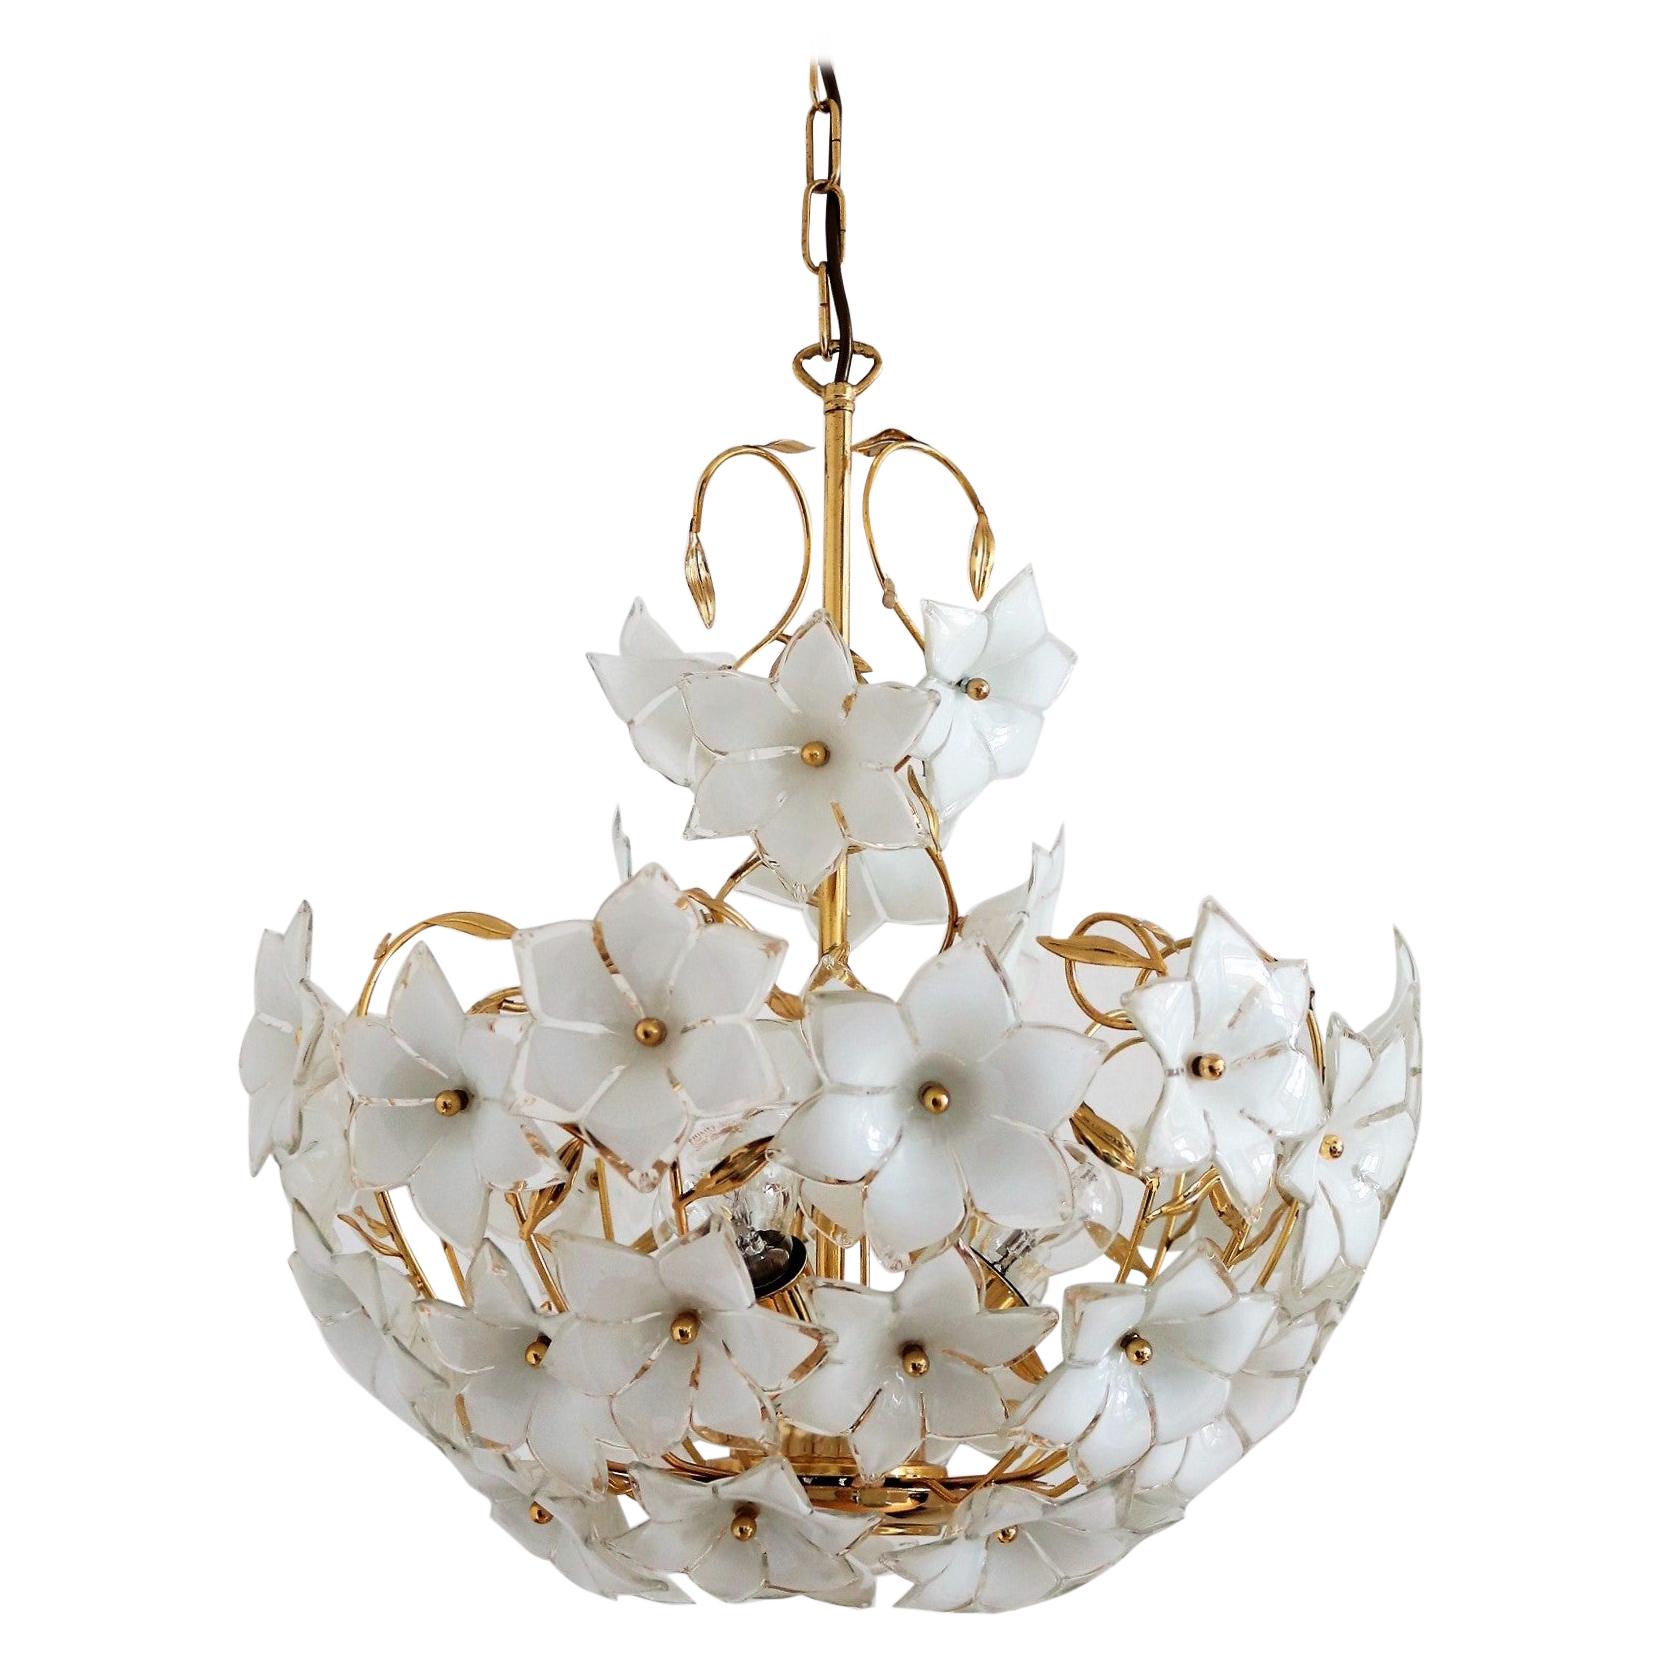 Italian Vintage Murano Glass and Brass Chandelier with White Glass Flowers, 1970